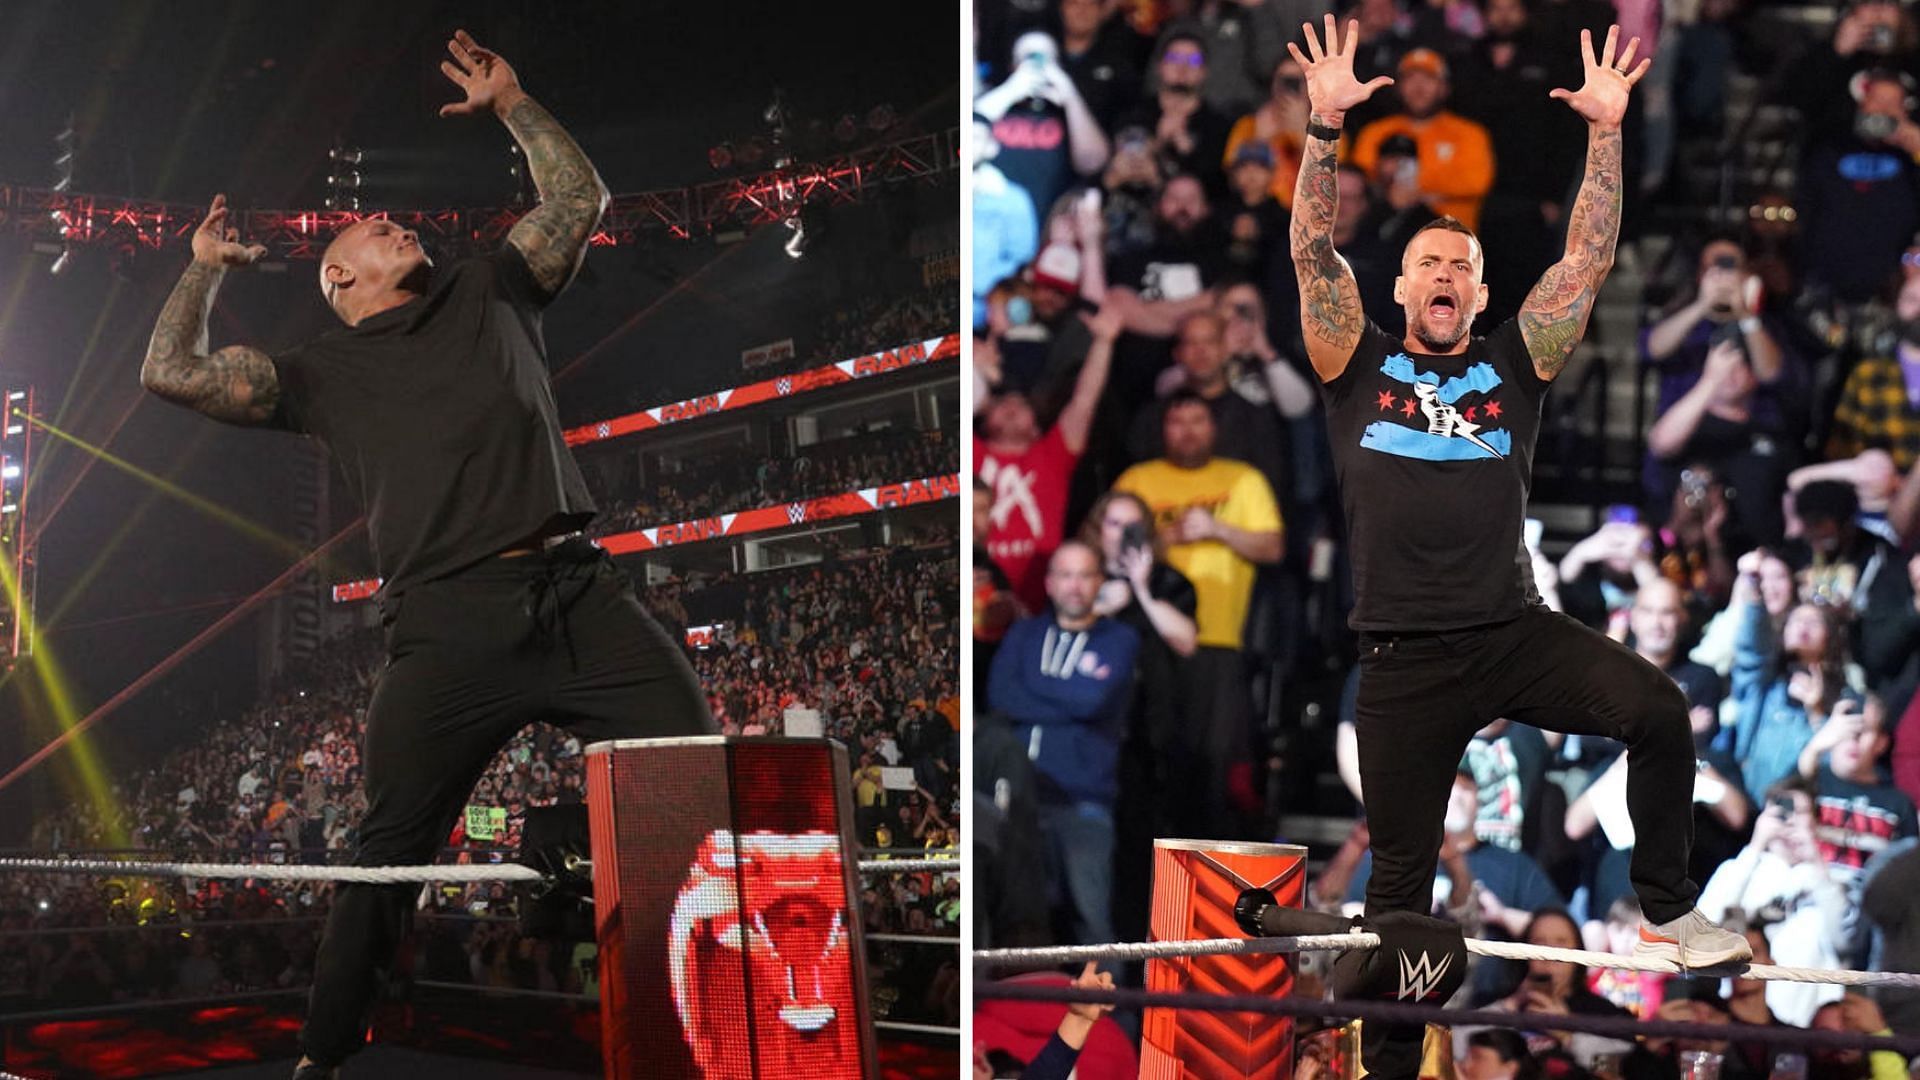 Randy Orton on the left and CM Punk on the right